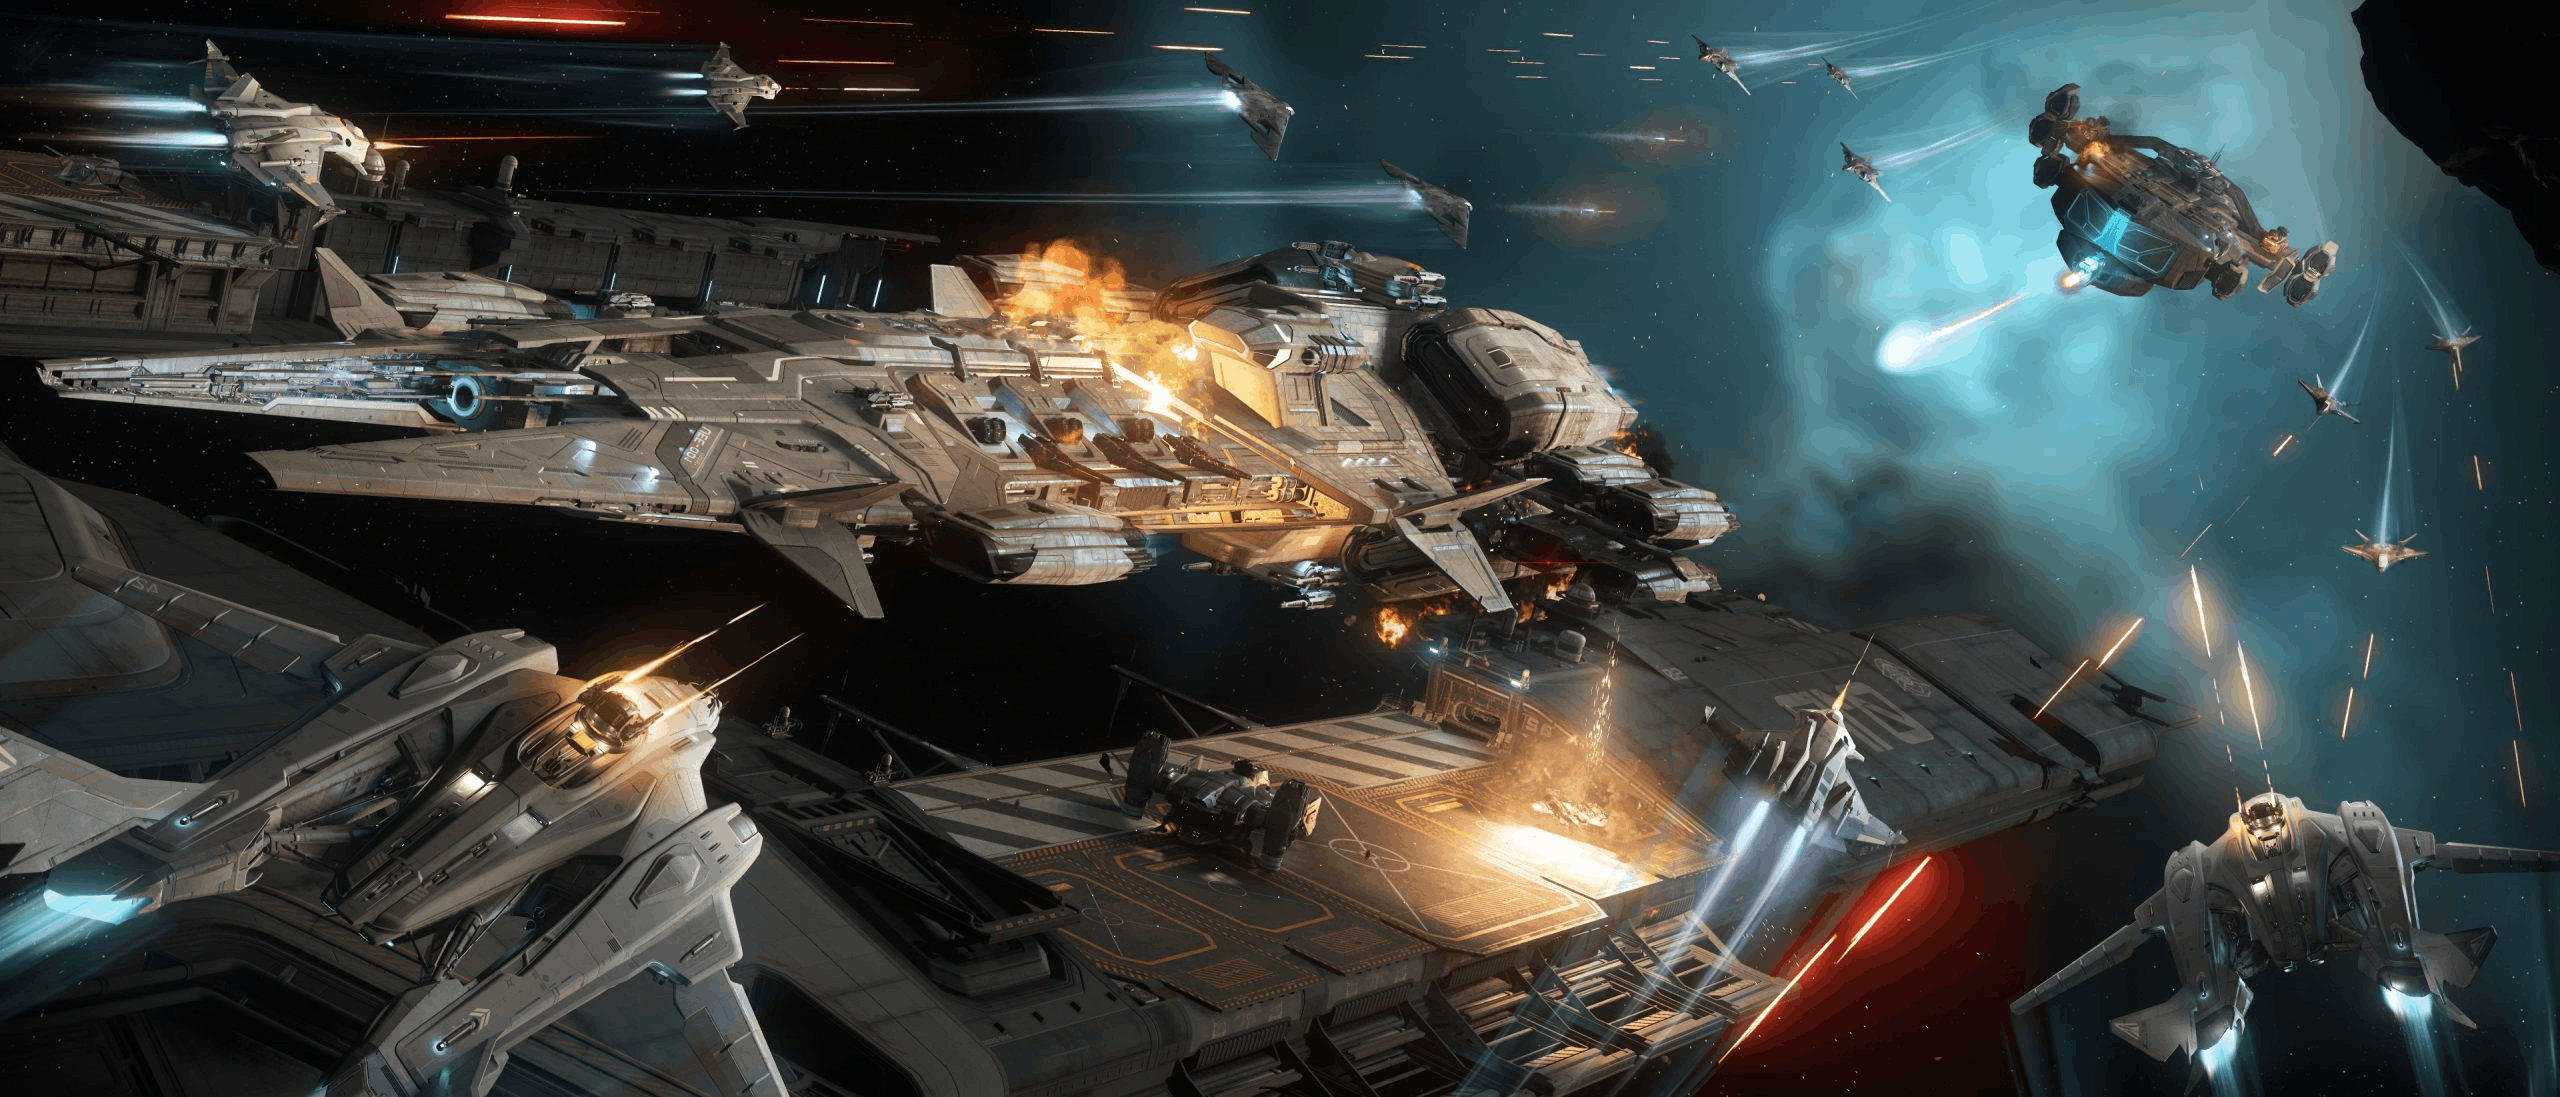 STAR CITIZEN FREE: FEBRUARY FREE FLIGHT EVENT UNVEILED, DATES AND CONTENT REVEALED